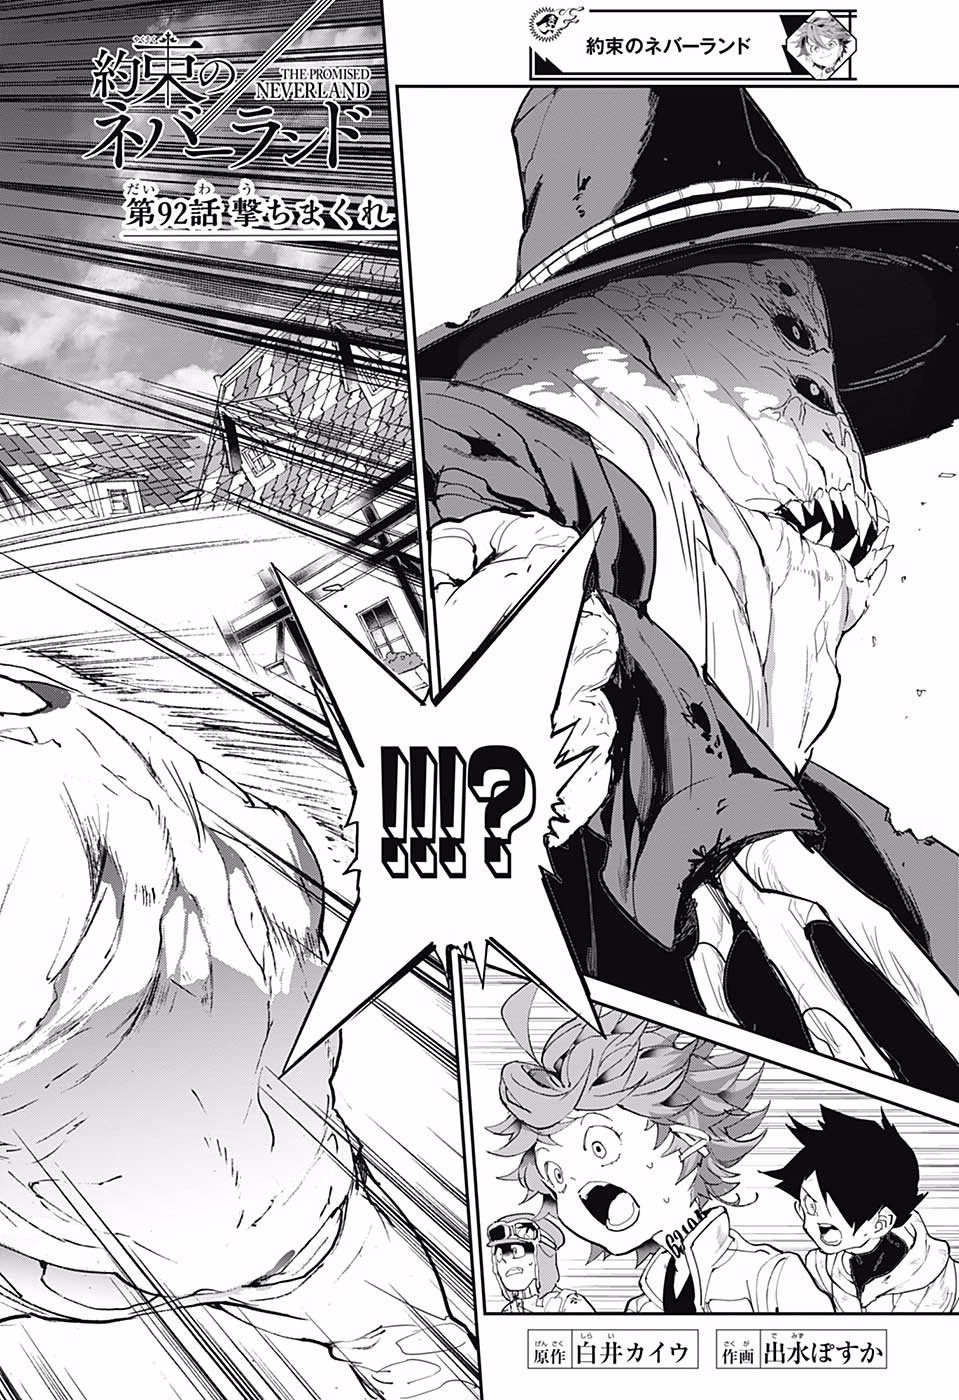 Chapter 92 The Promised Neverland Wiki Fandom